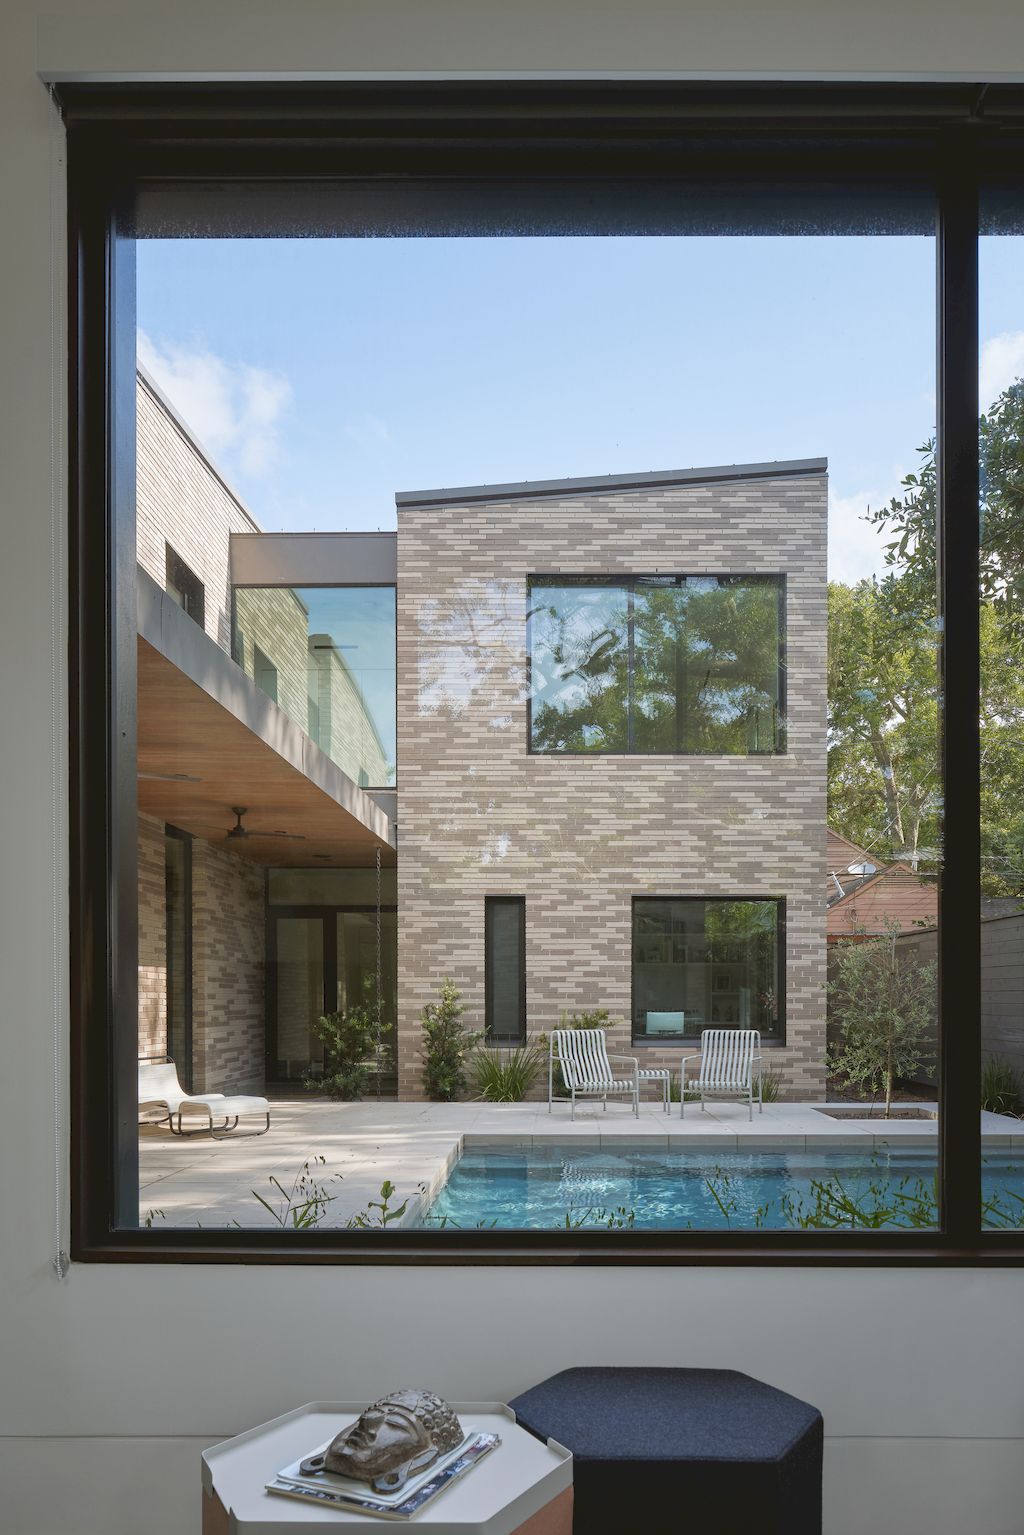 Greenbriar-Residence-Elegant-series-of-stones-by-CONTENT-Architecture-15